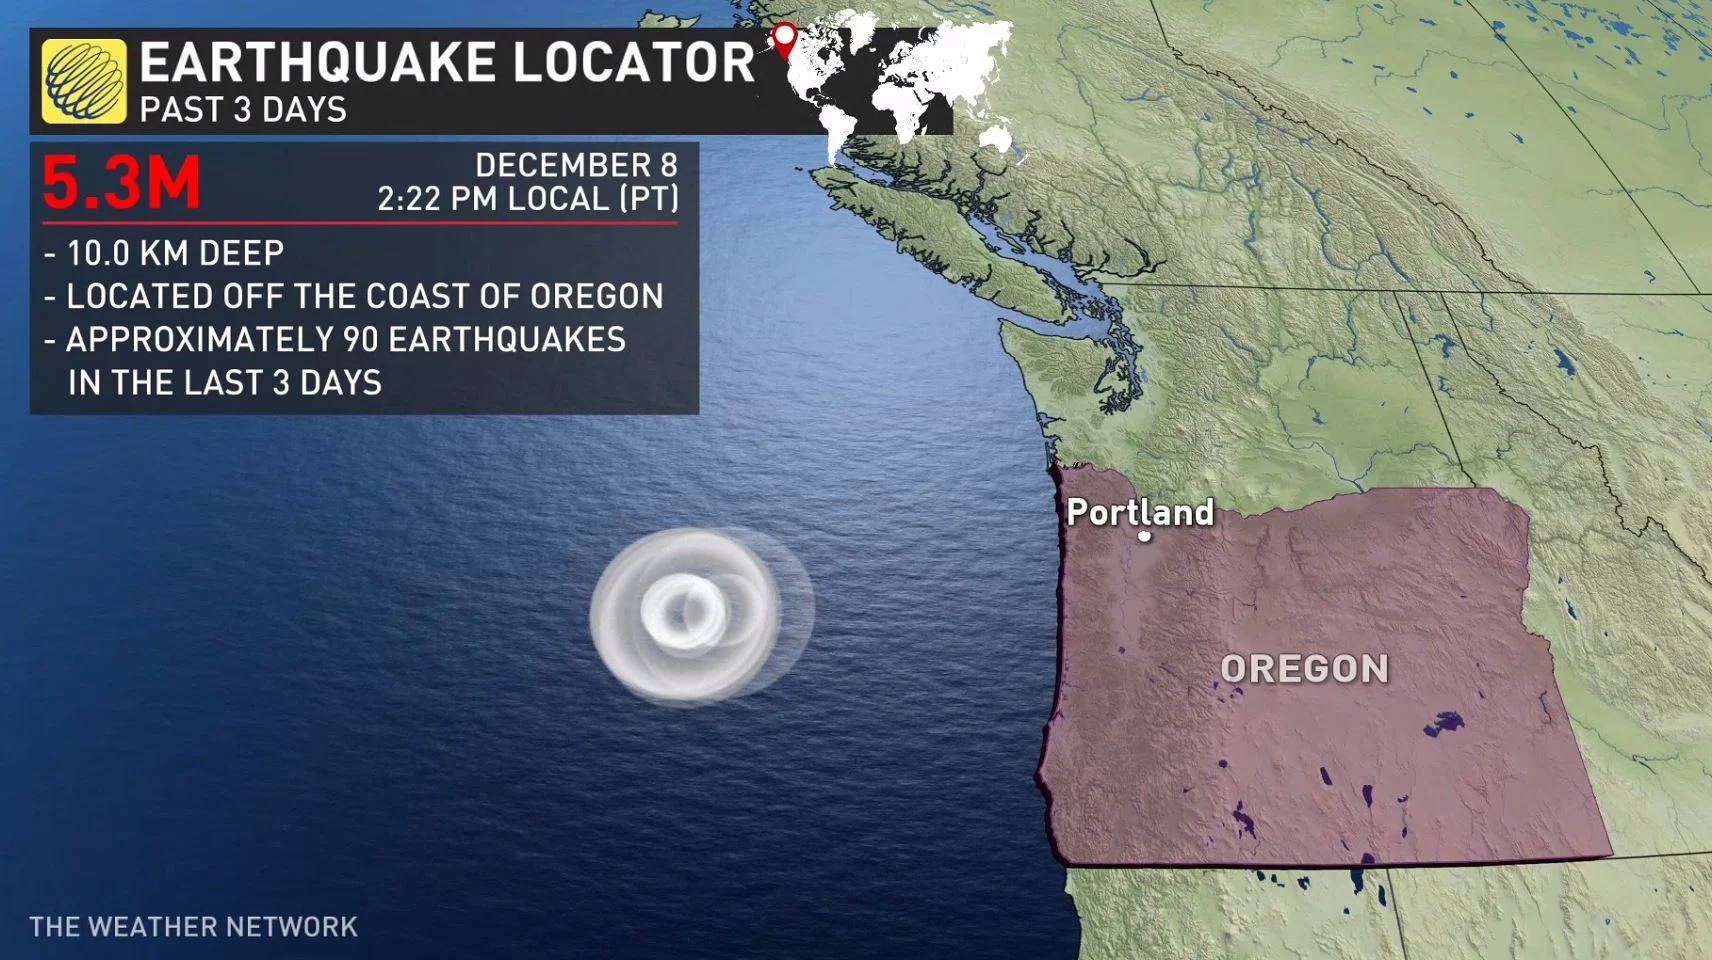 Swarm of earthquakes jolts seabed off the U.S. West Coast